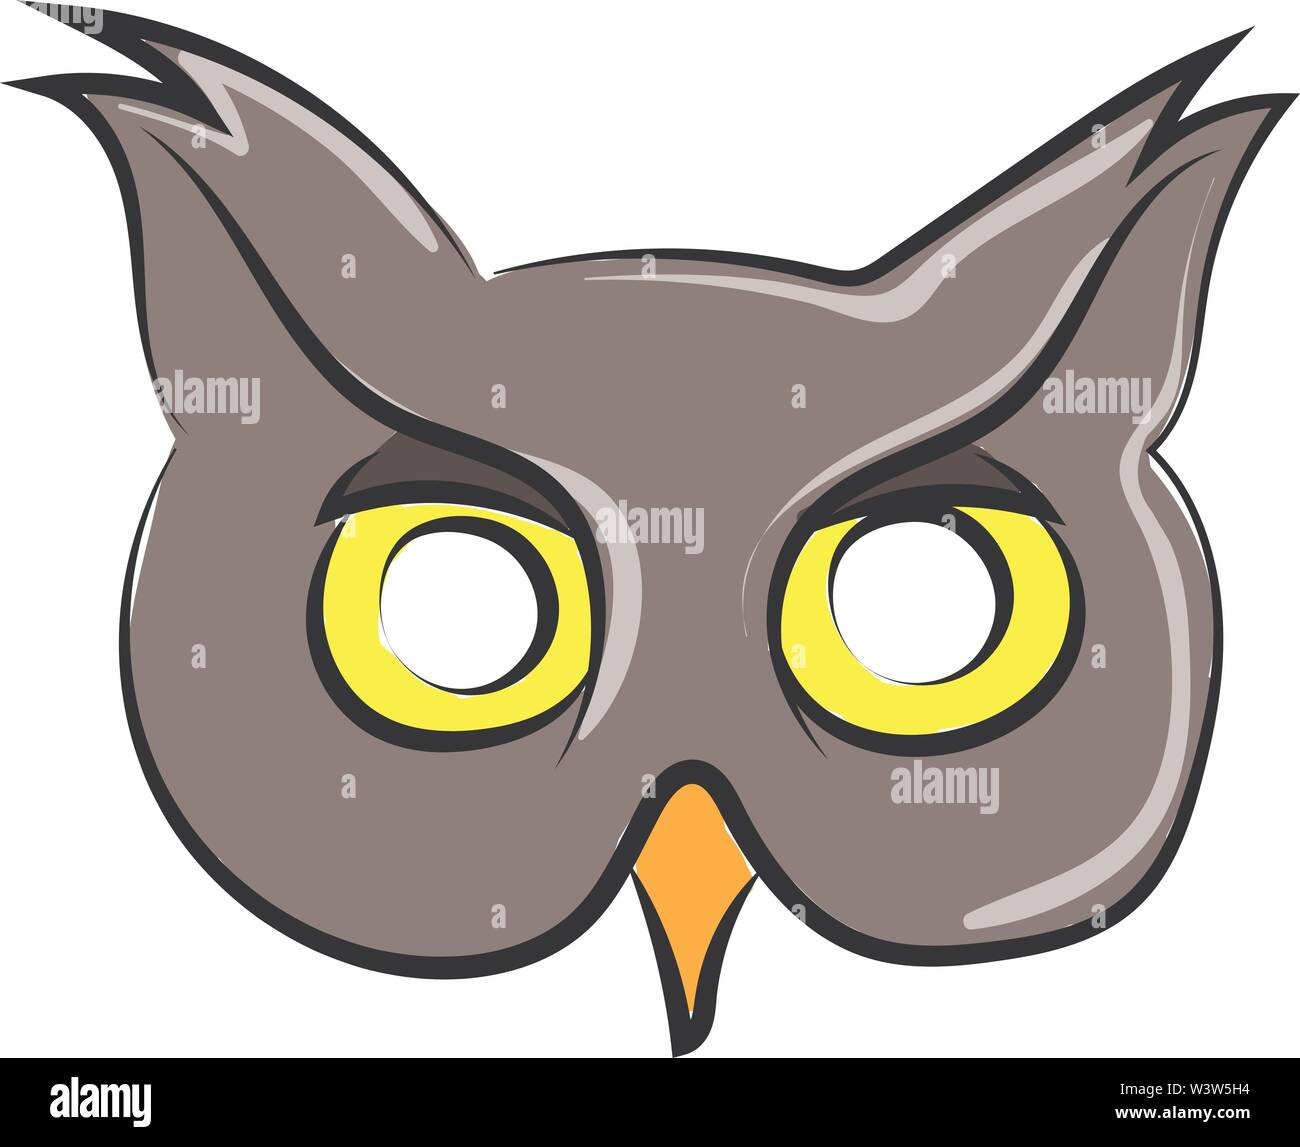 Owl mask Stock Vector Images - Alamy